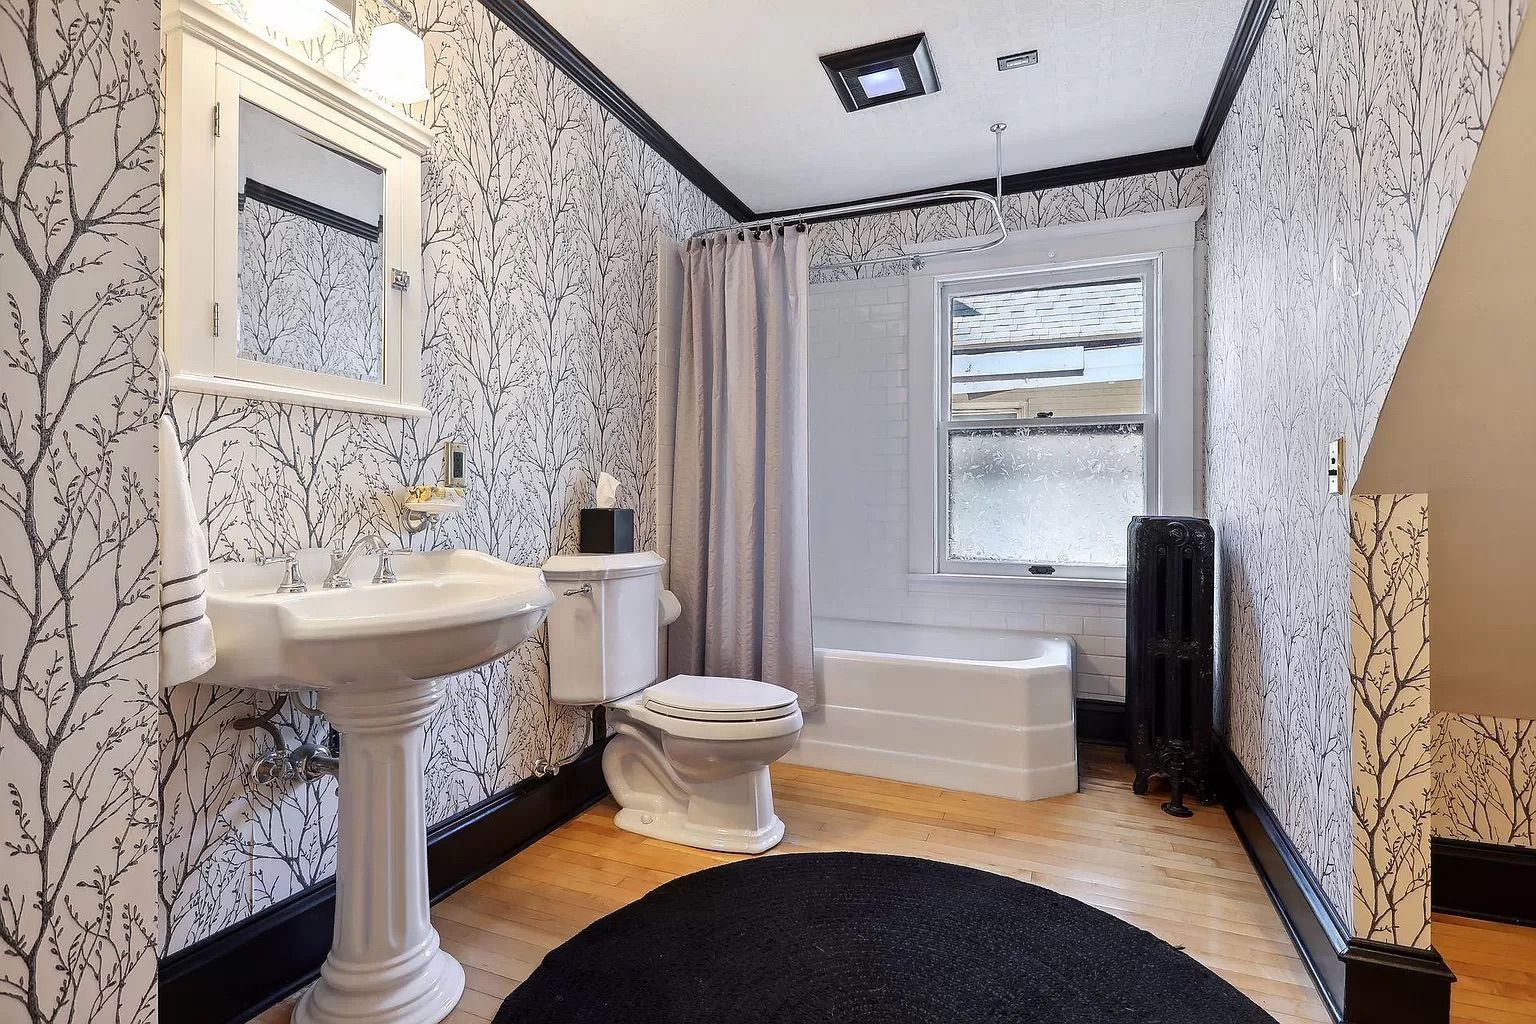 A photo of a bathroom with black and white wallpaper.